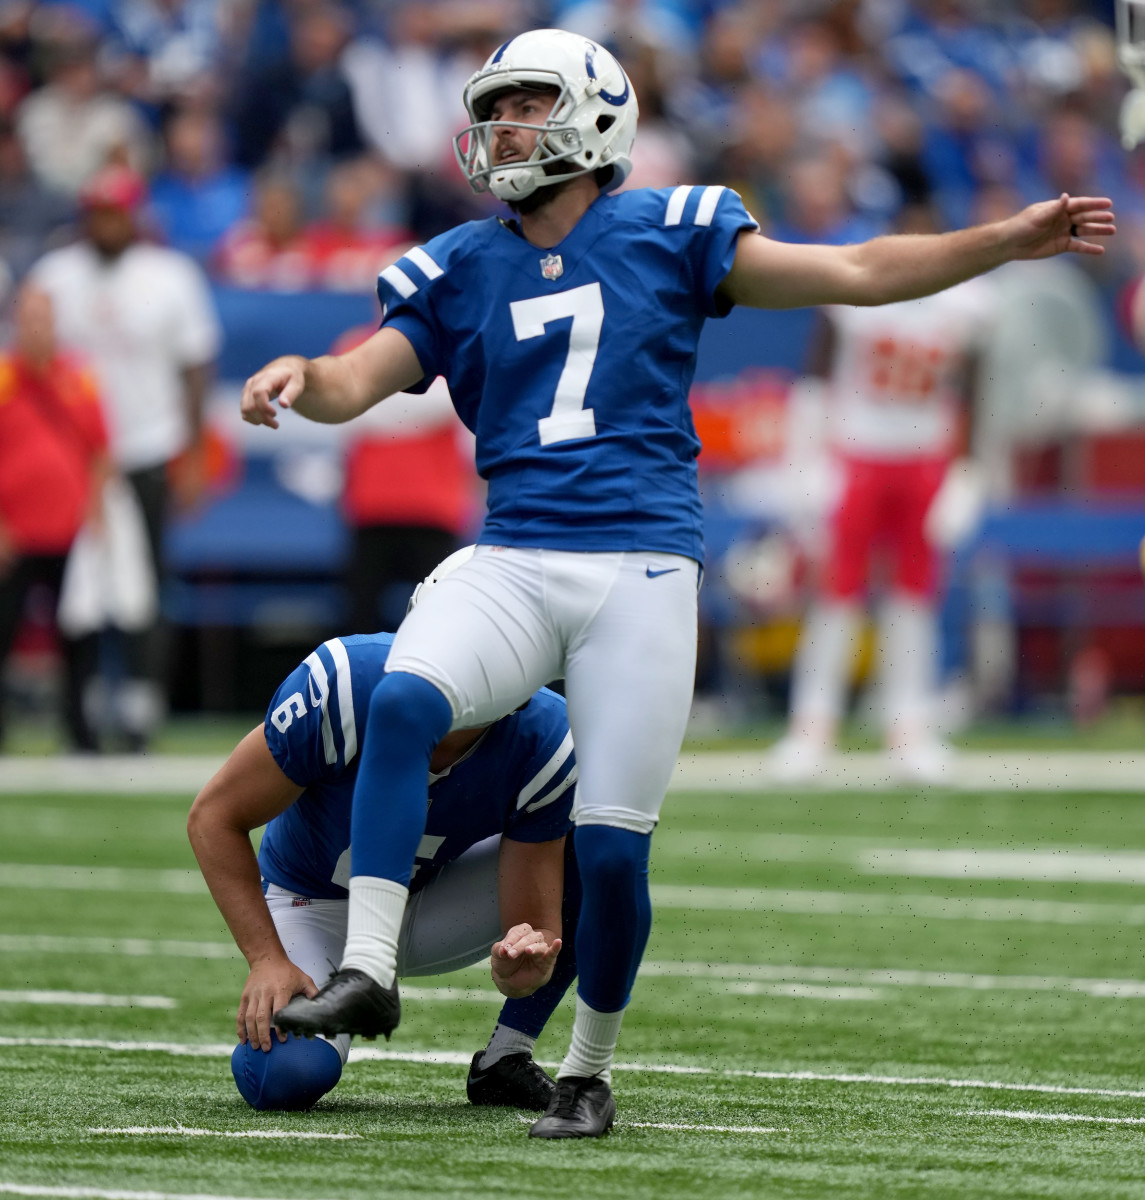 Sep 25, 2022; Indianapolis, Indiana, USA; Indianapolis Colts place kicker Chase McLaughlin (7) follows through on a filed goal kick during a game against the Kansas City Chiefs at Lucas Oil Stadium in Indianapolis. Mandatory Credit: Jenna Watson/IndyStar Staff-USA TODAY Sports